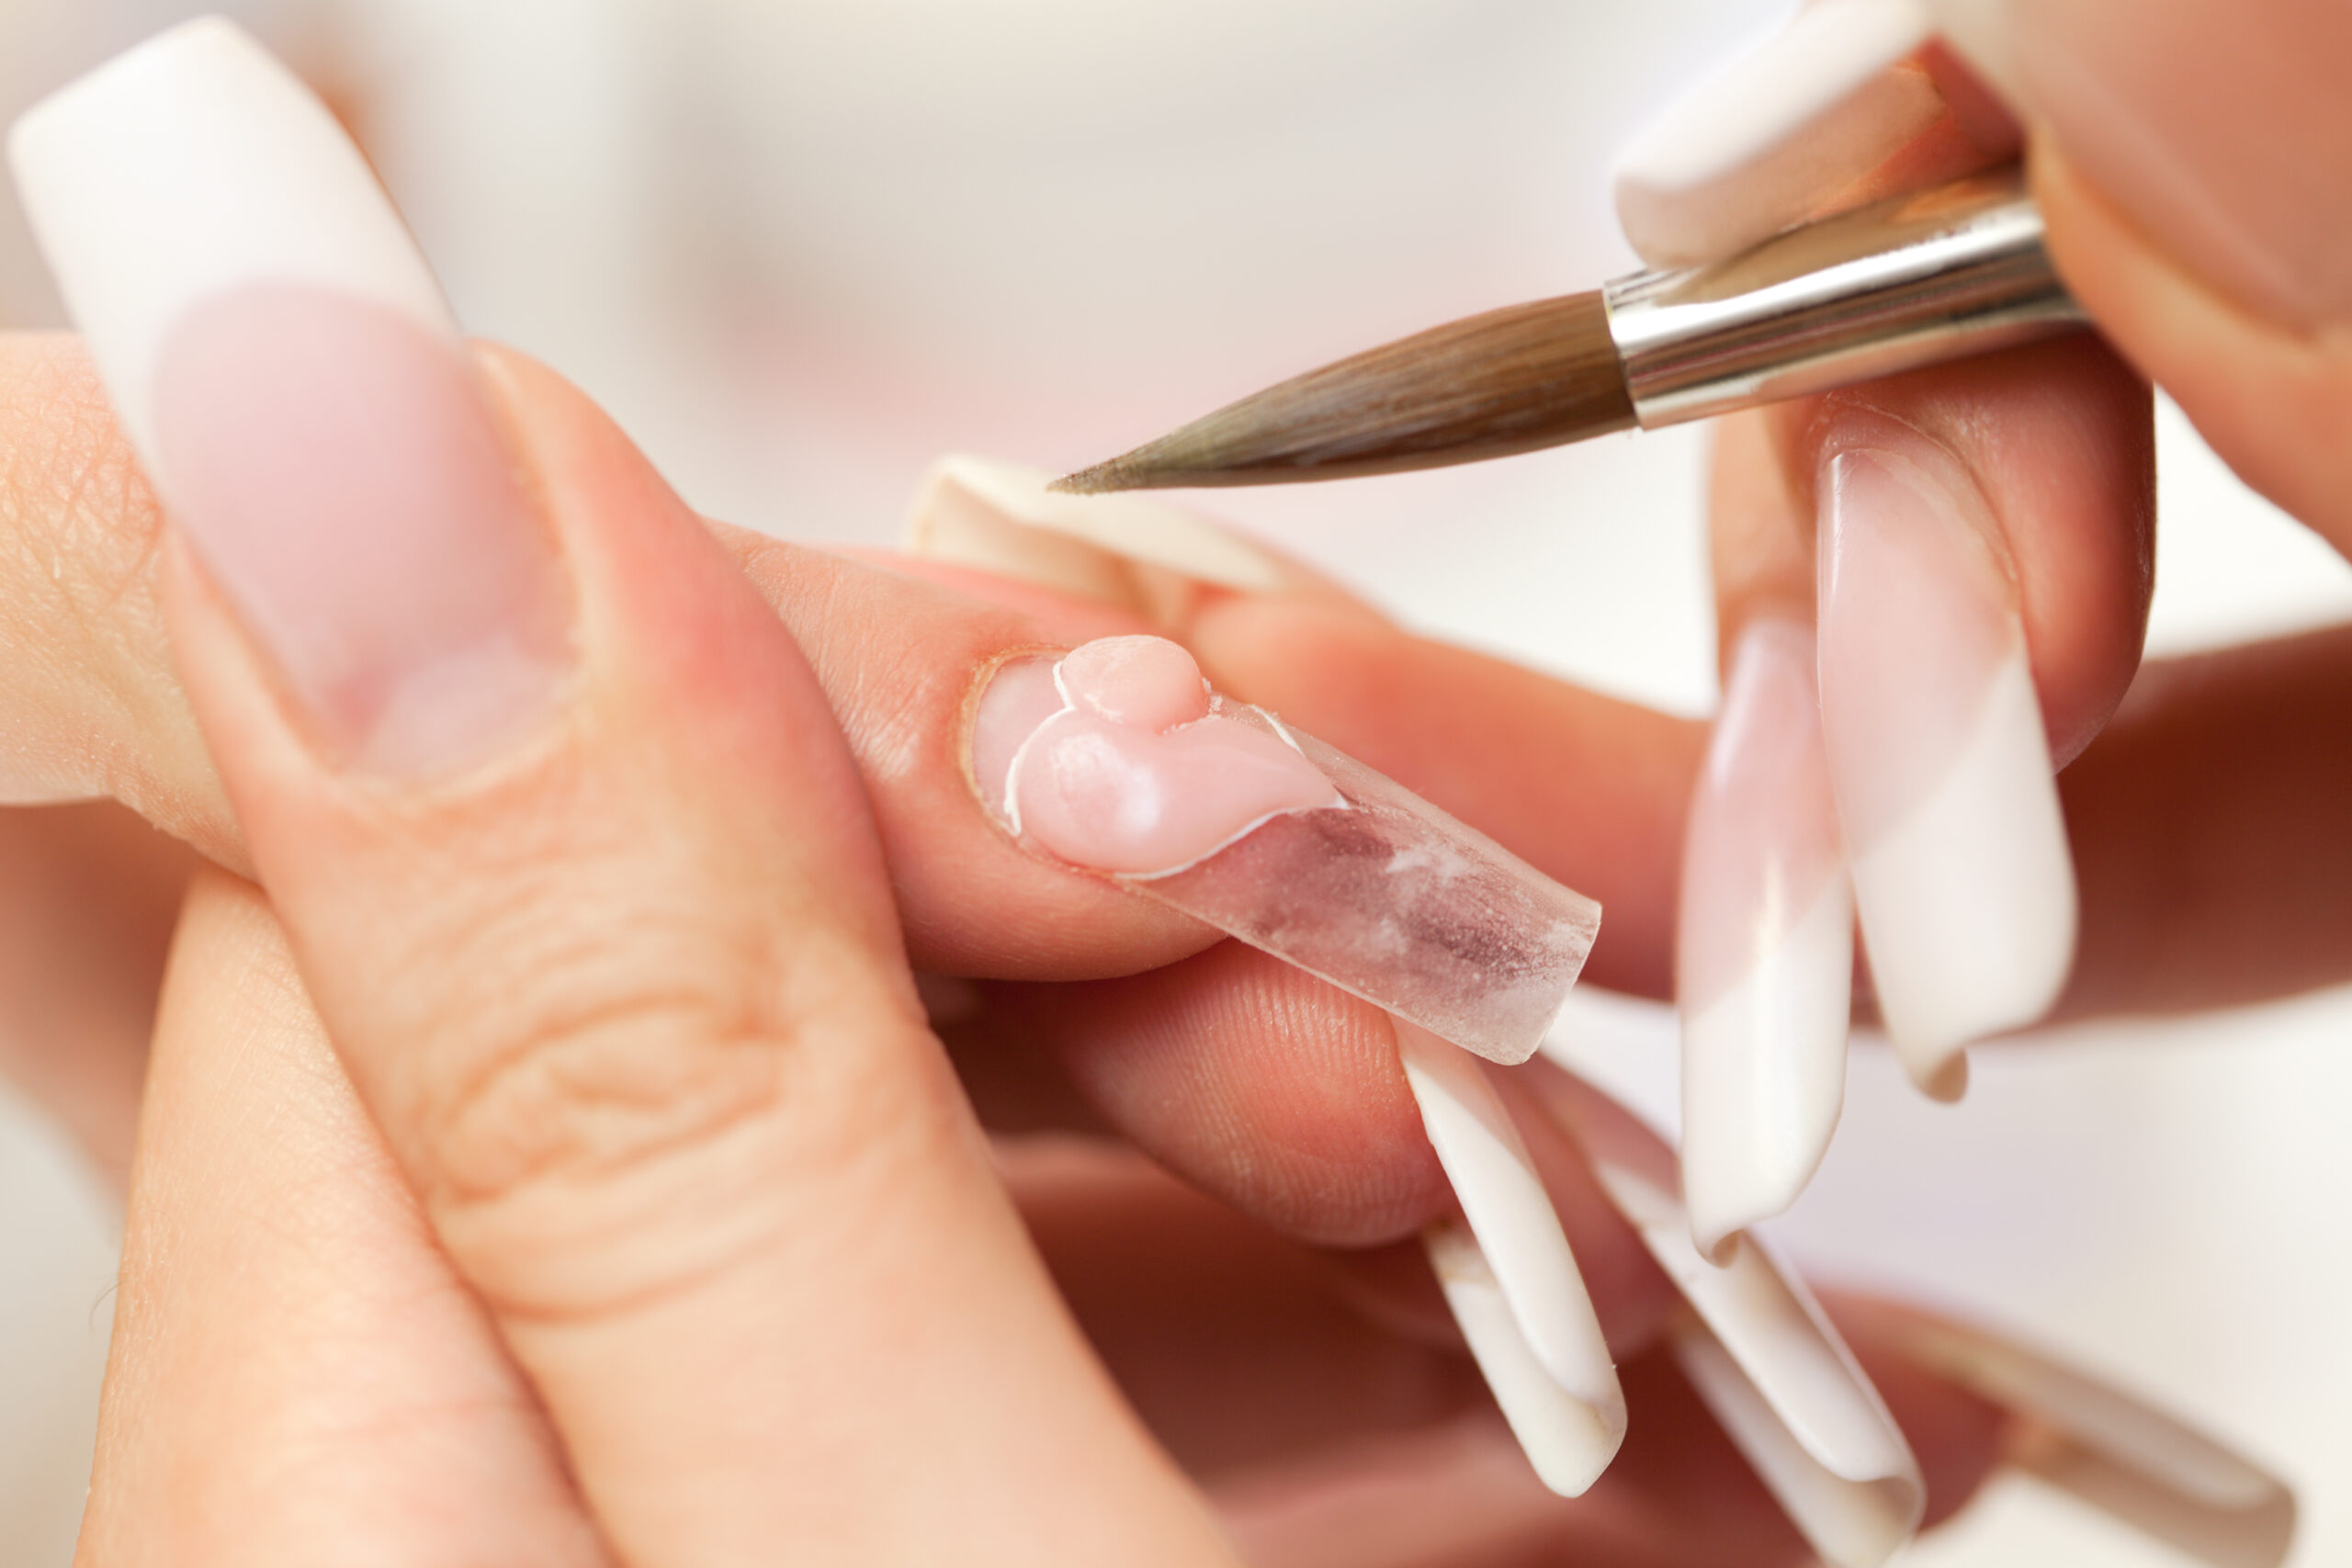 Acrylic Nail Sets: Are They Worth the Risk?